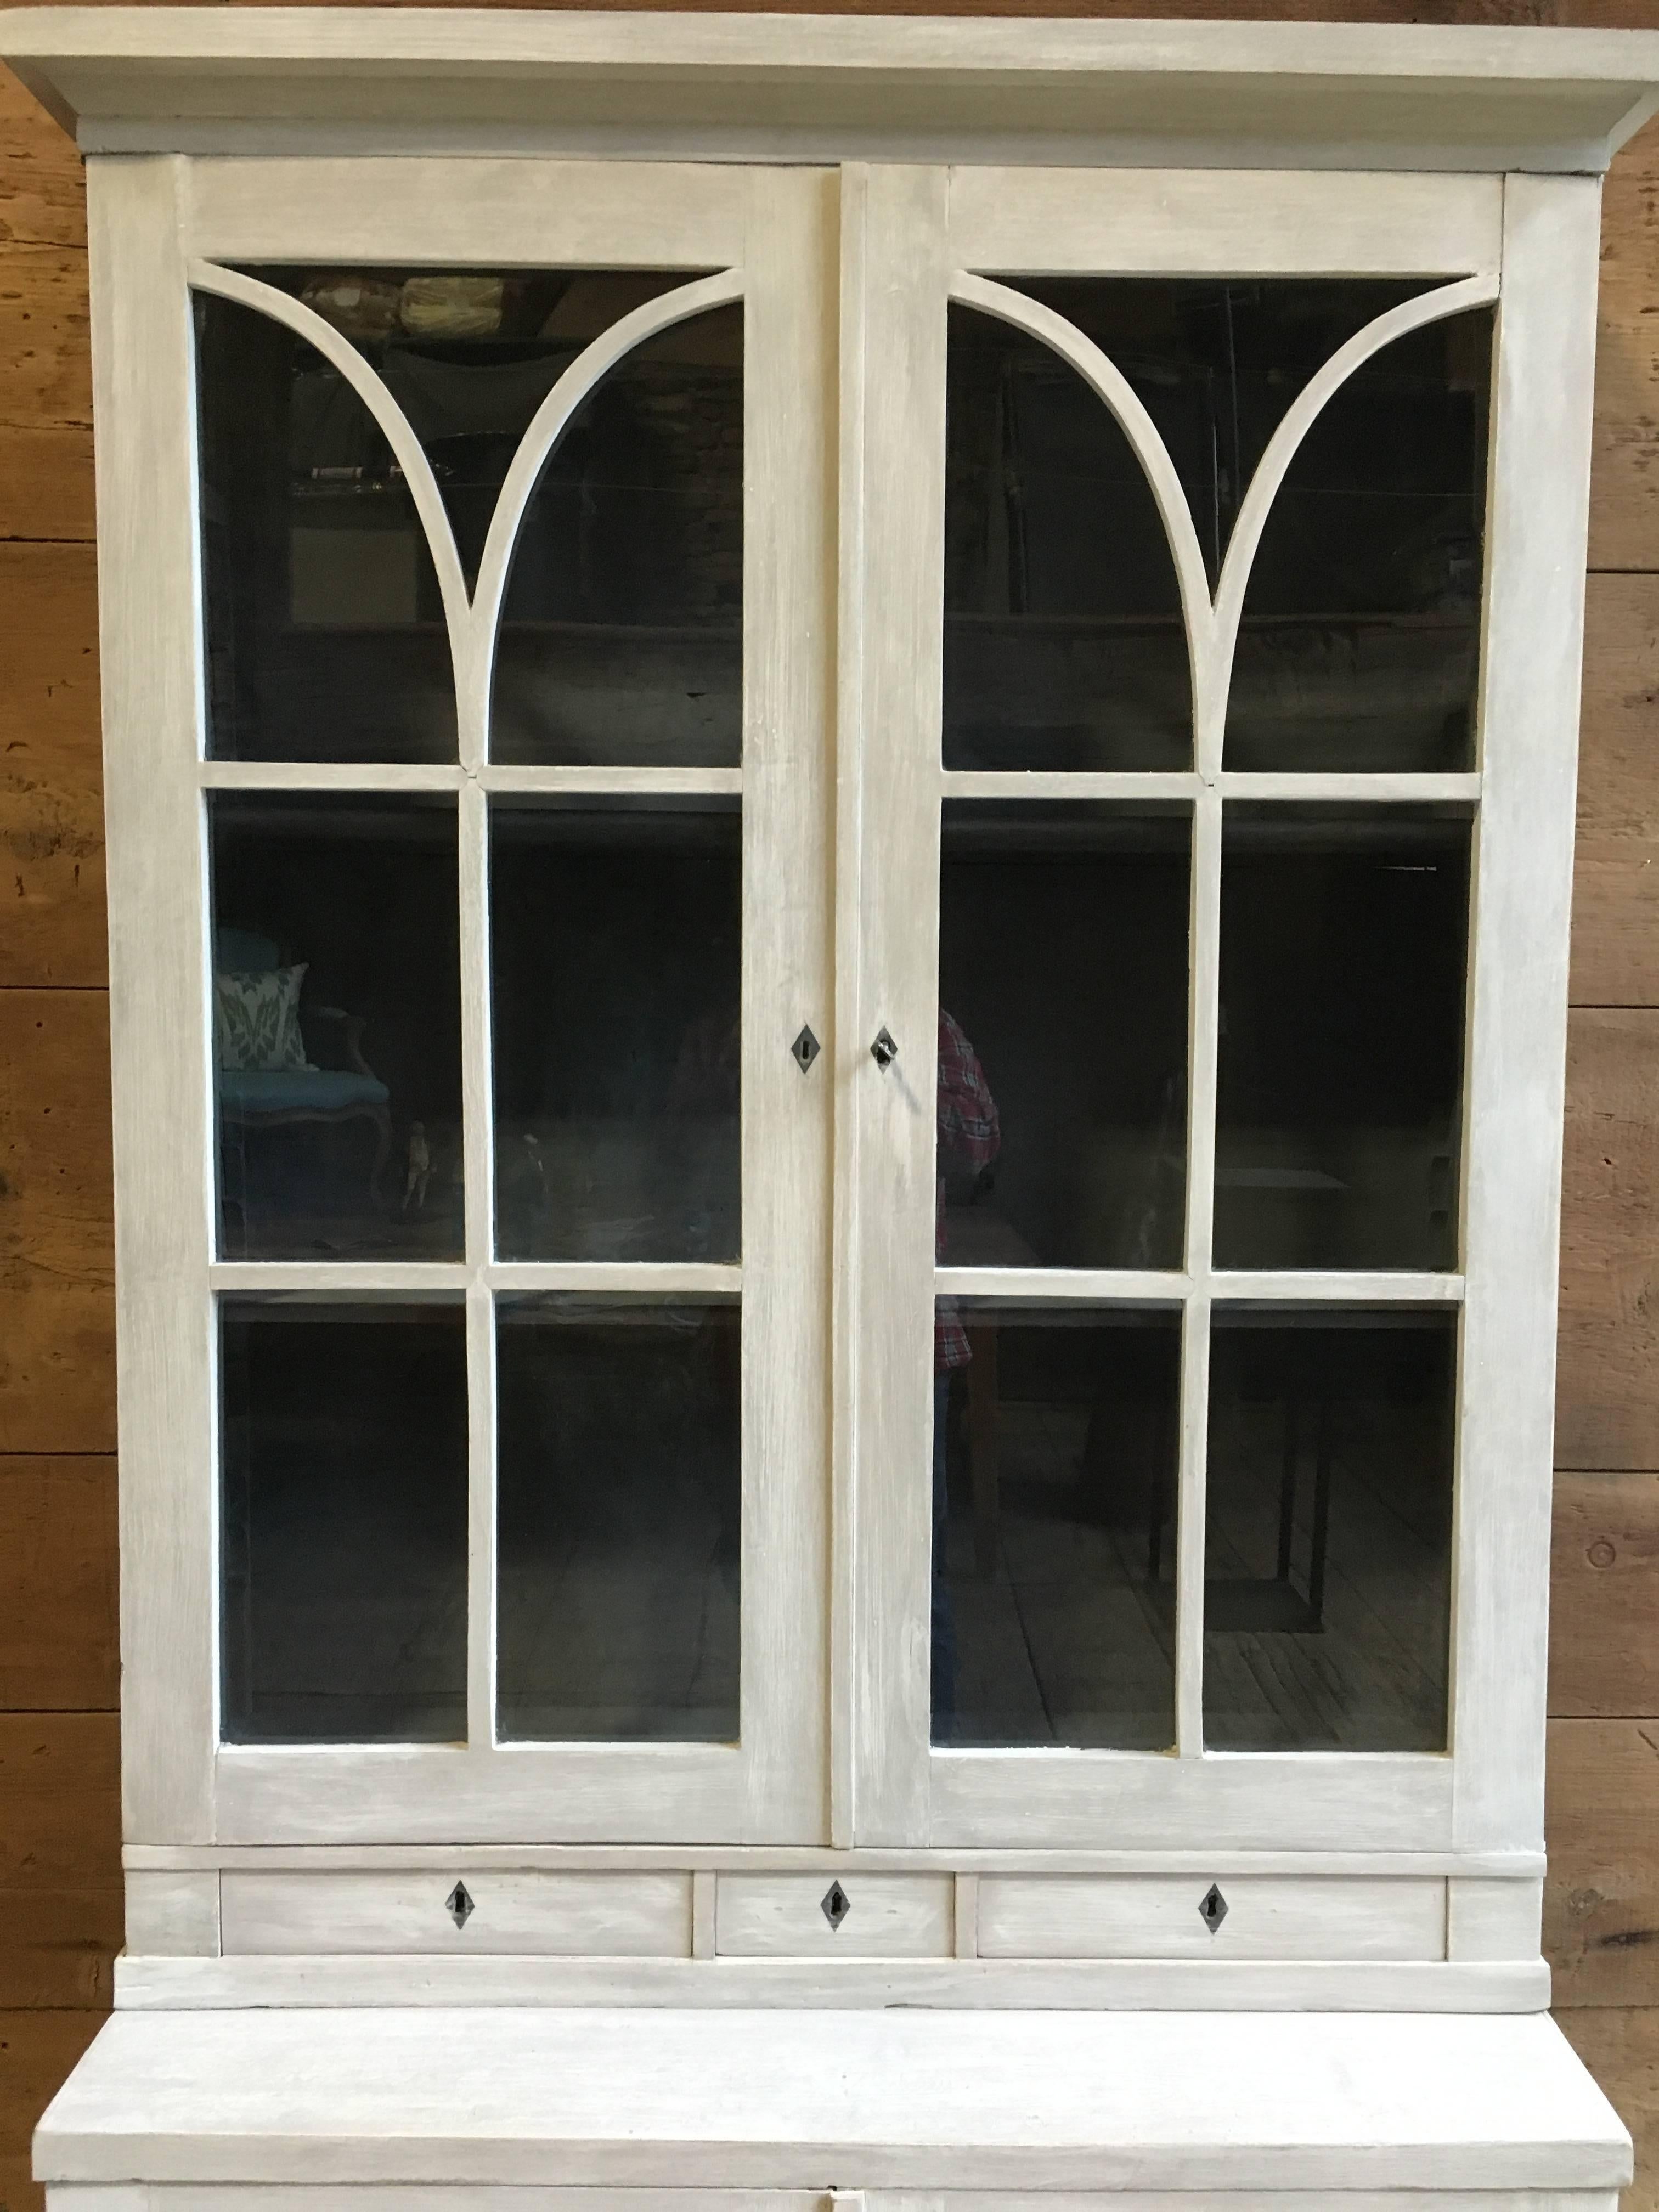 A French Directoire style grey painted cabinet or bookcase, in two parts, the upper part with glazed doors over three small drawers, with interior adjustable shelves and the lower cabinet with two paneled doors and interior shelves, early 19th